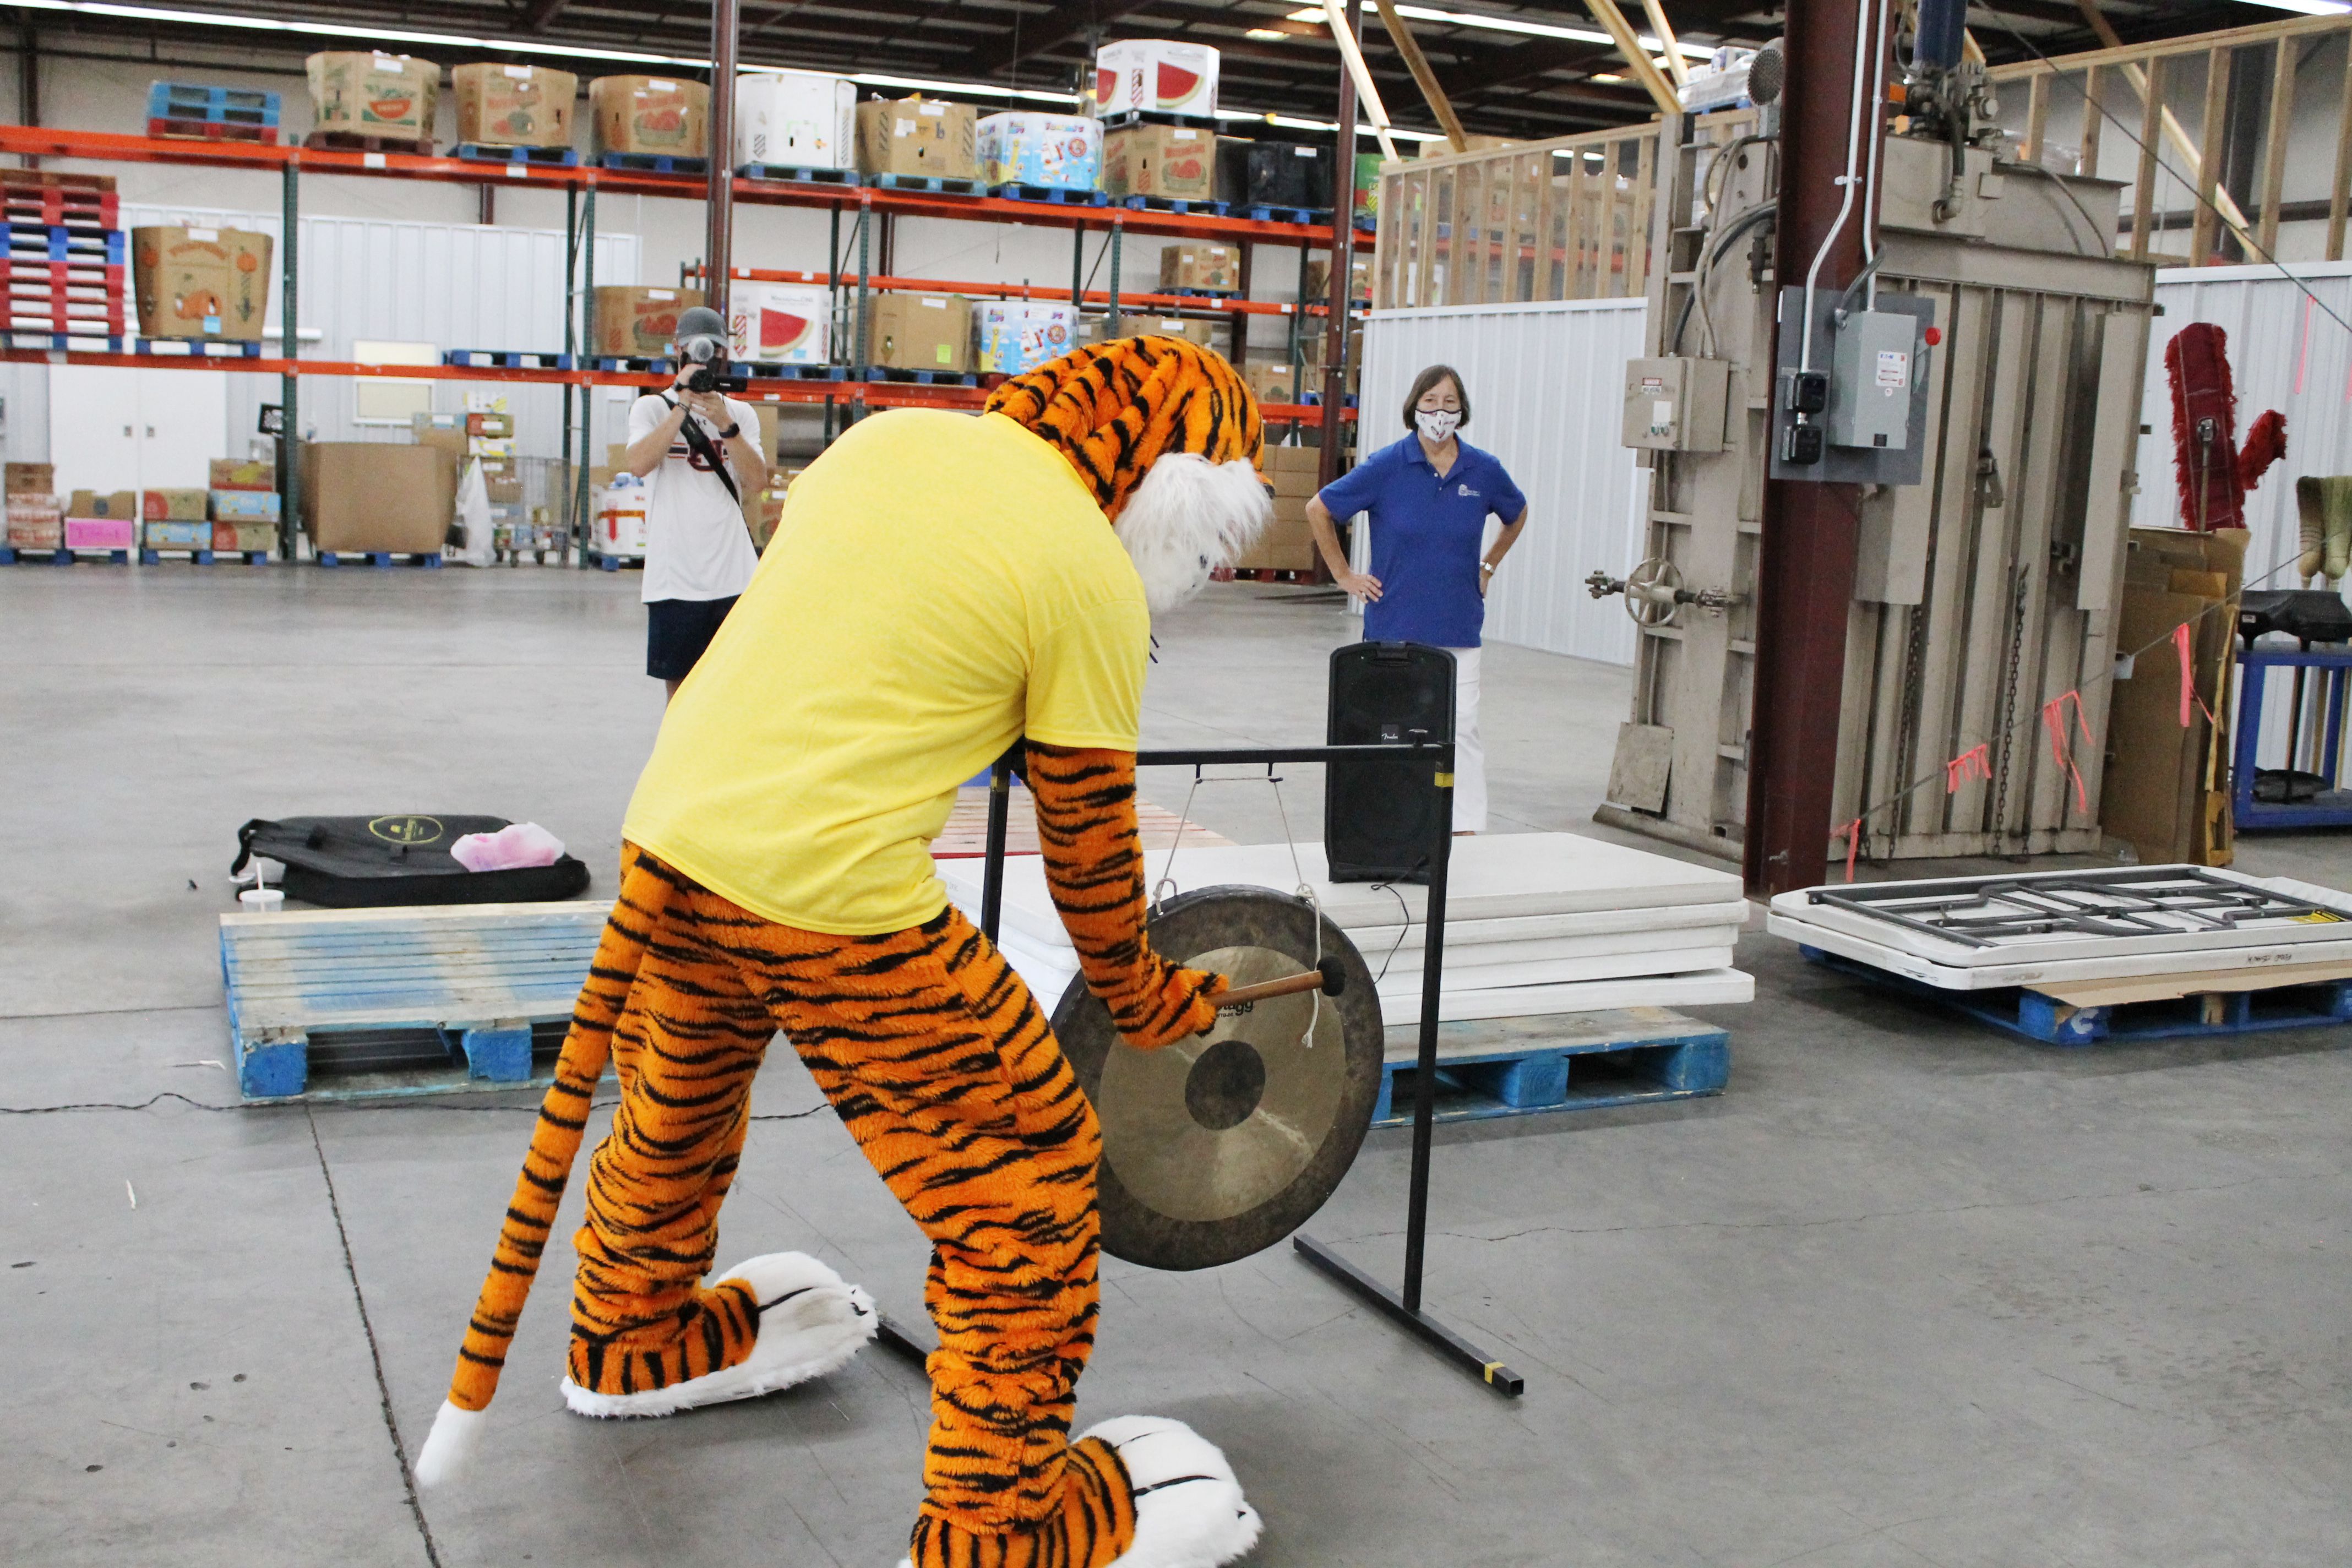 Aubie hitting the gong